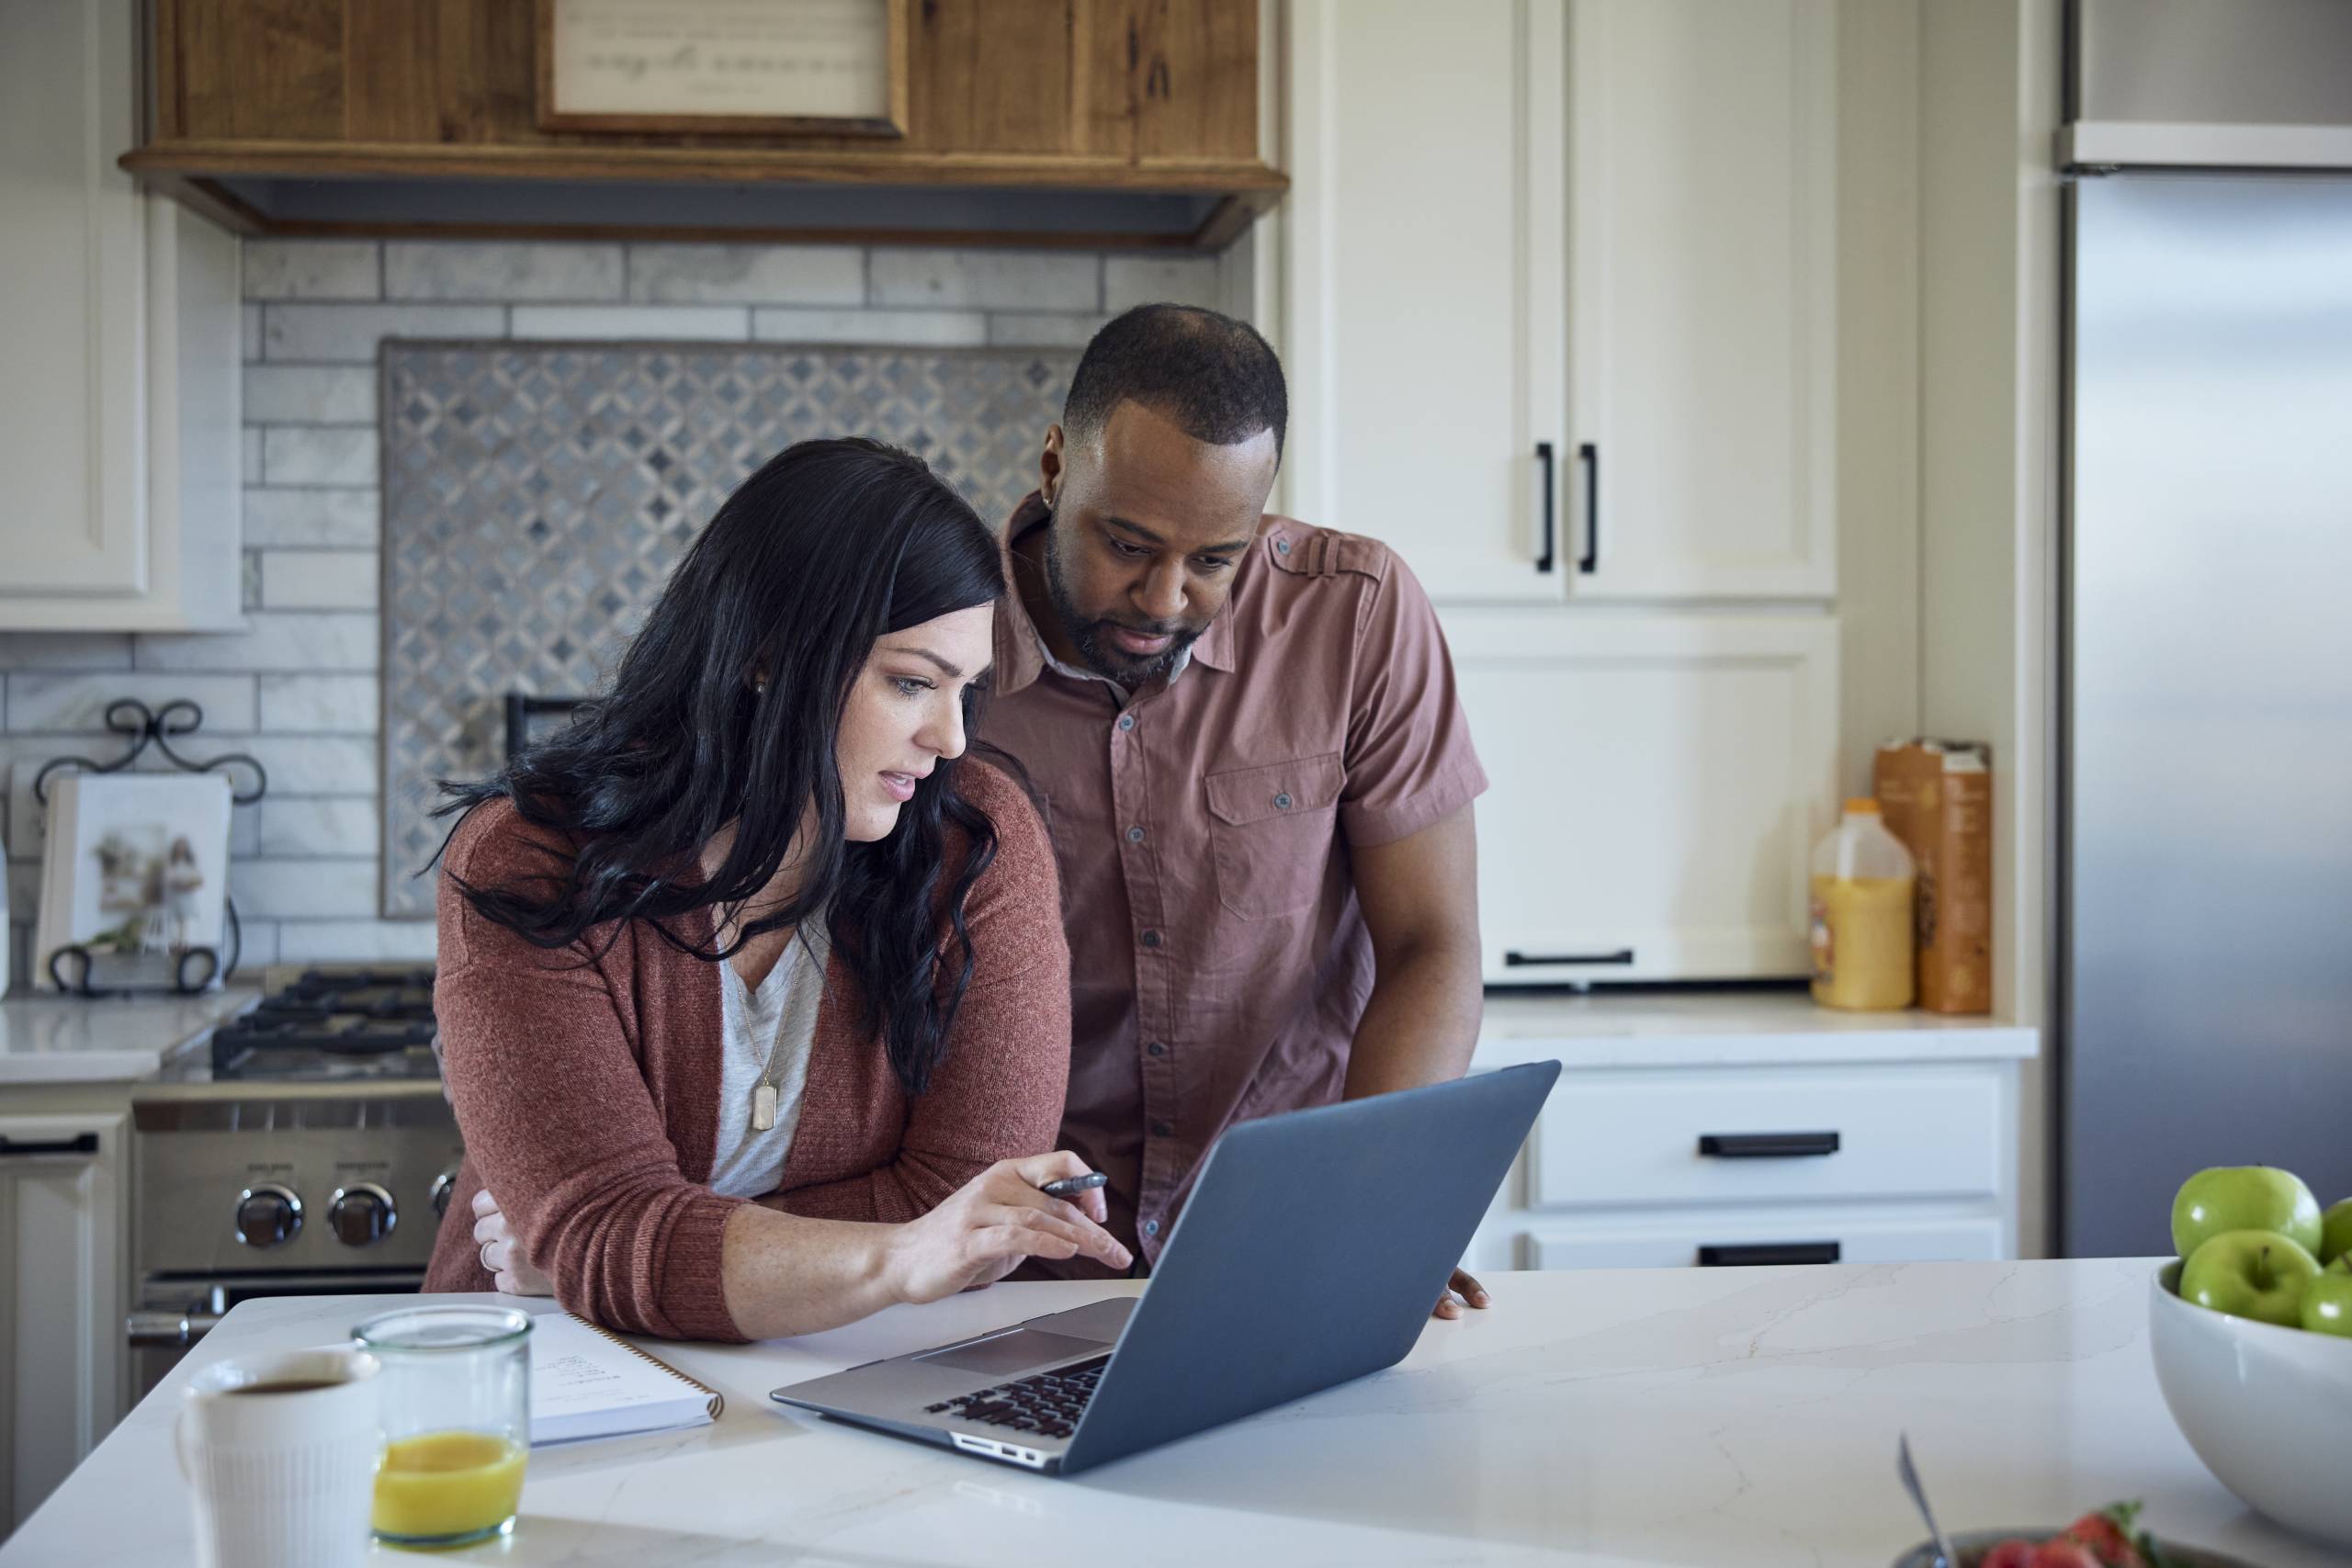 White woman and African American man sit at kitchen counter working together with a pen, paper and laptop.